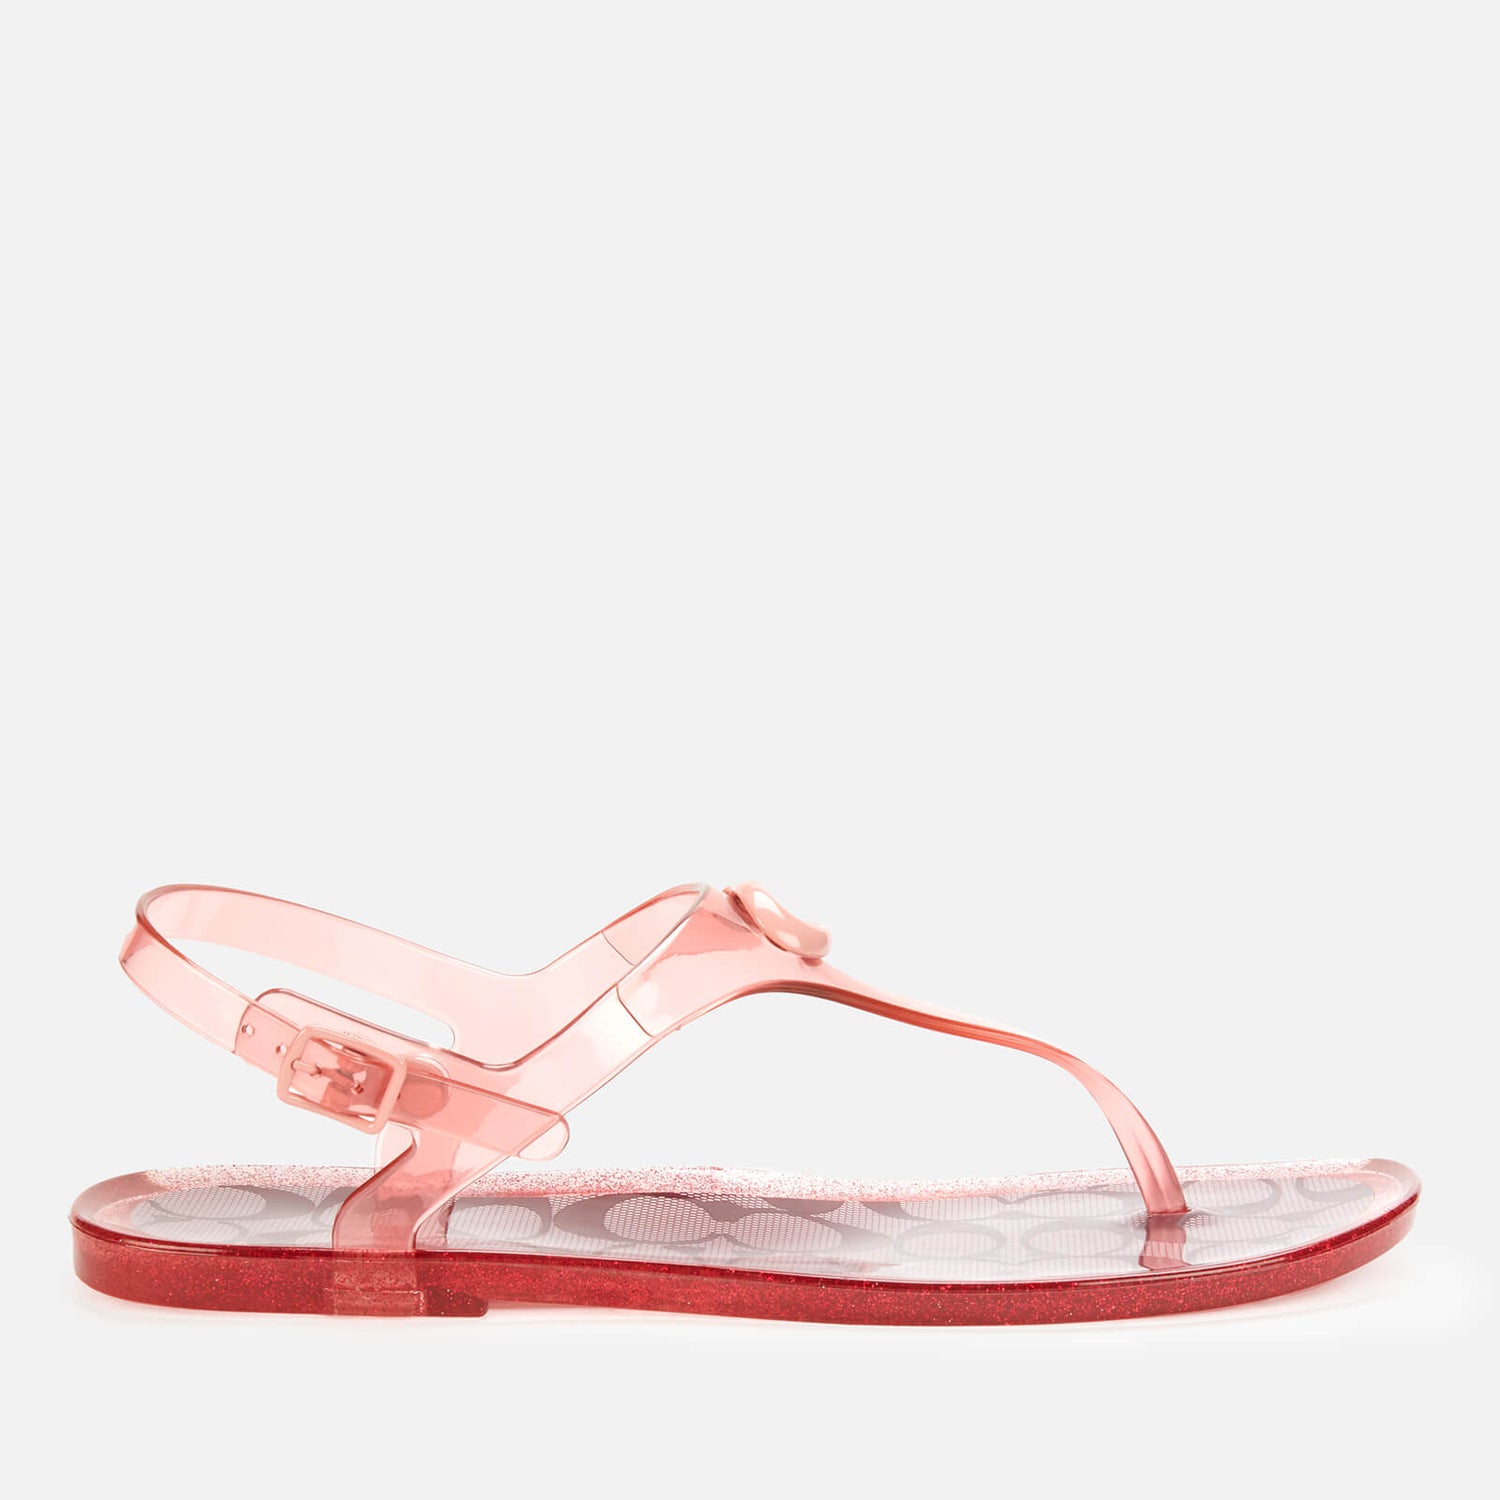 Coach Women's Natalee Rubber Jelly Sandals - Candy Apple/Candy Pink